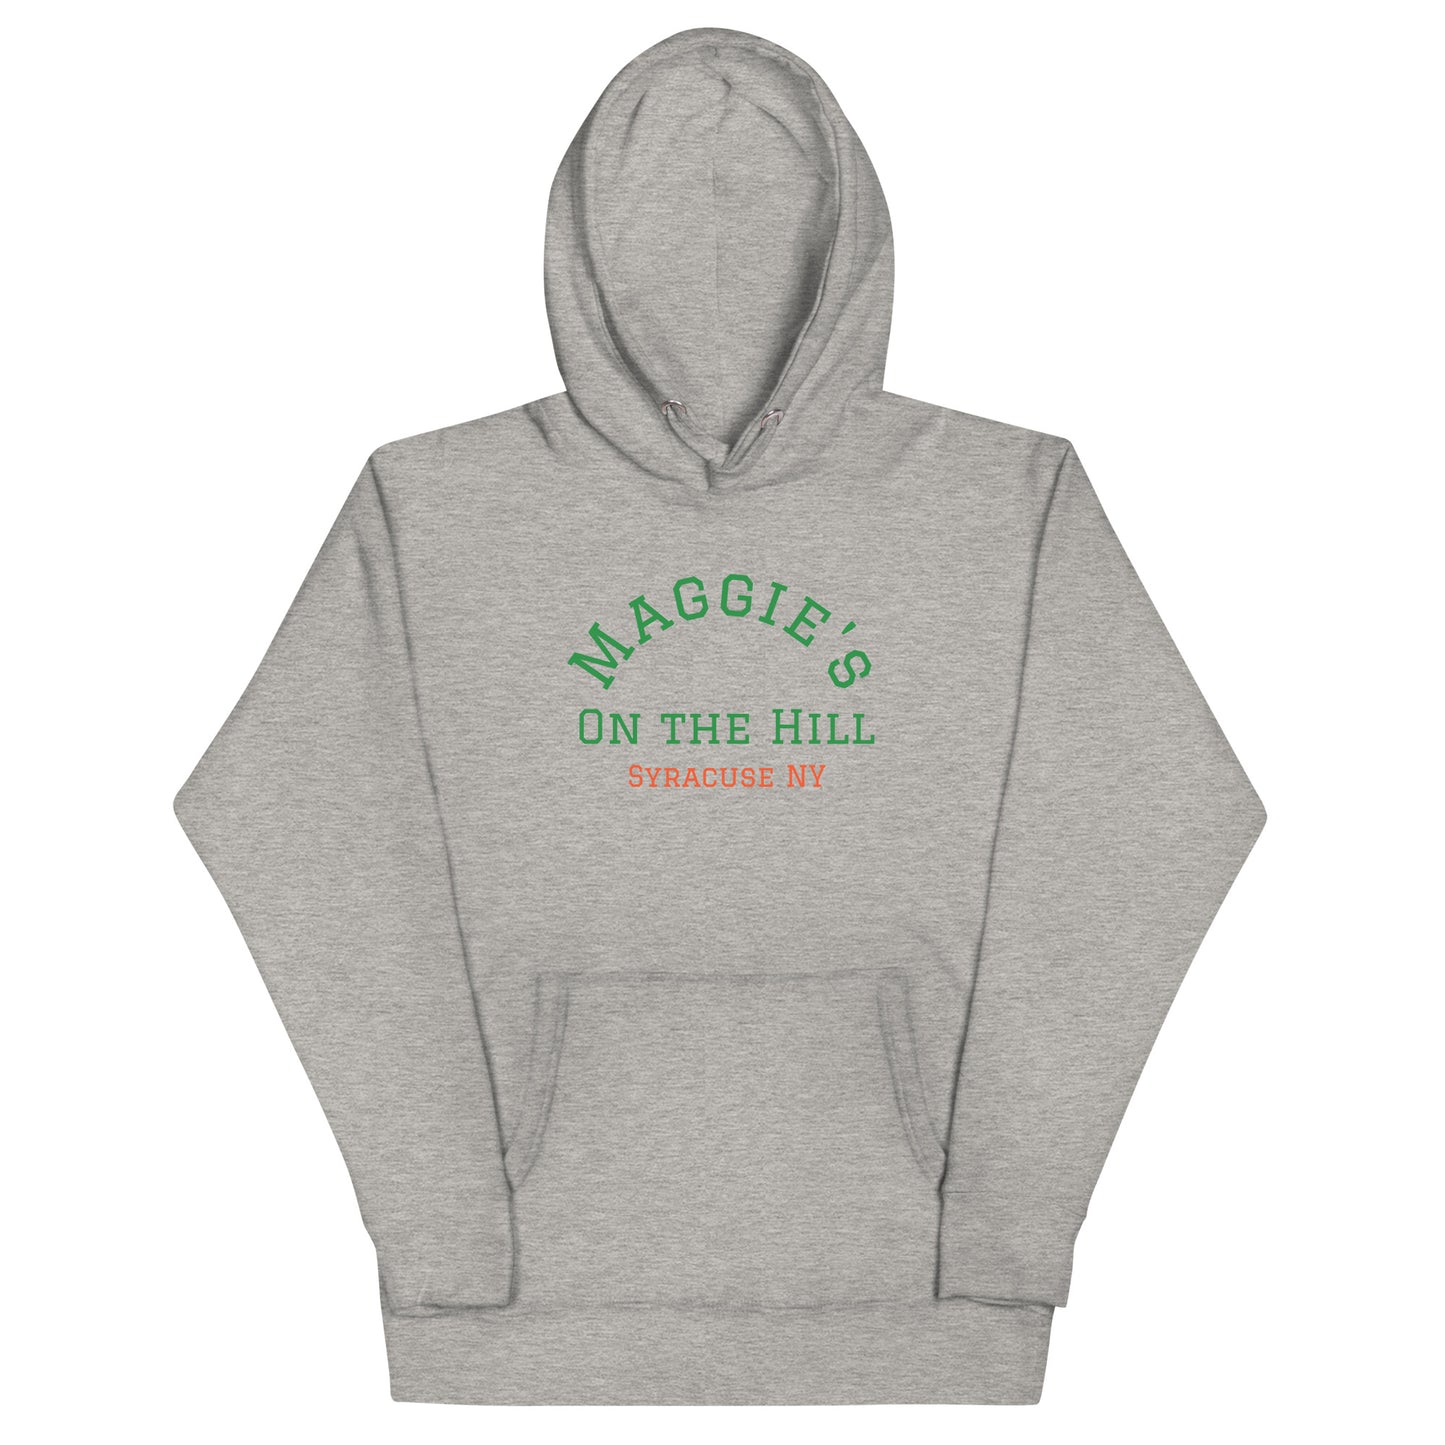 Maggie's on the Hill - Syracuse NY - Ultimate Hoodie